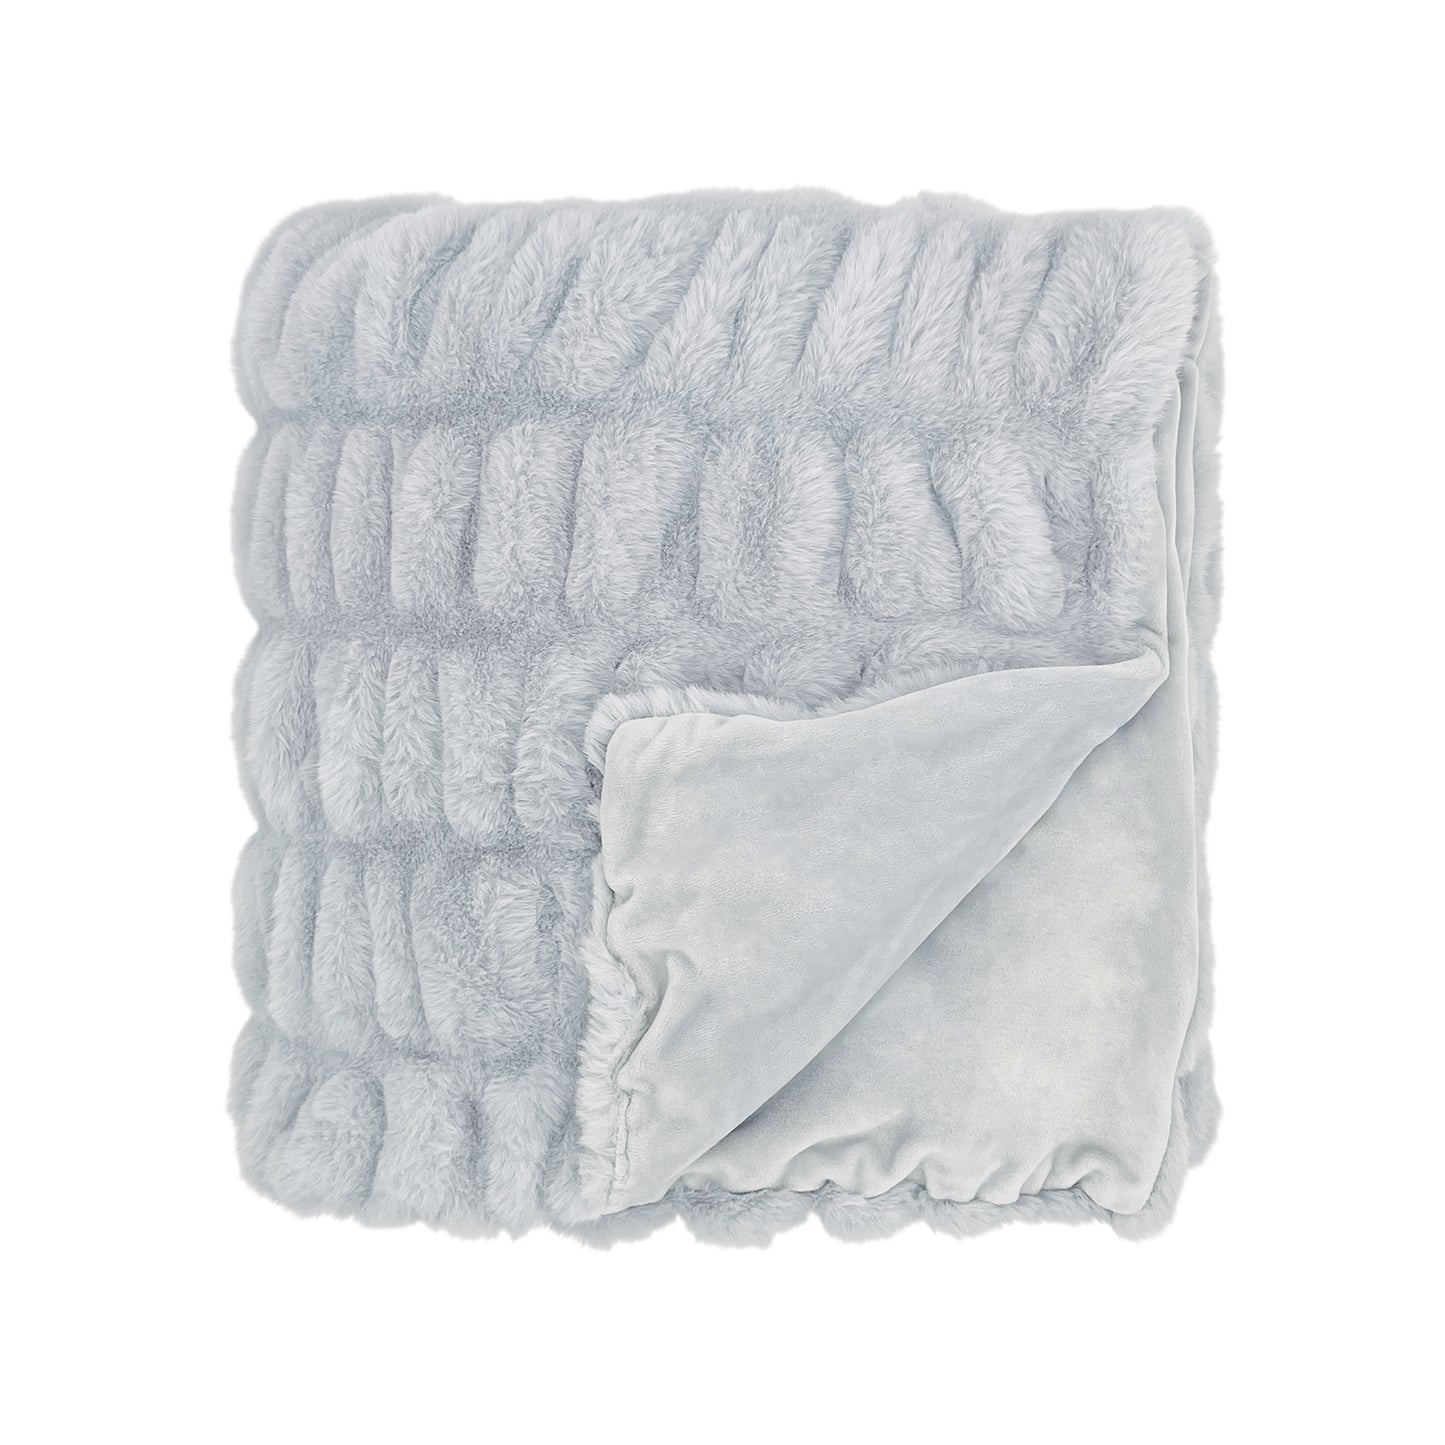  The Mood Mallow Faux Fur Throw, 50x60 in., Arctic Gray